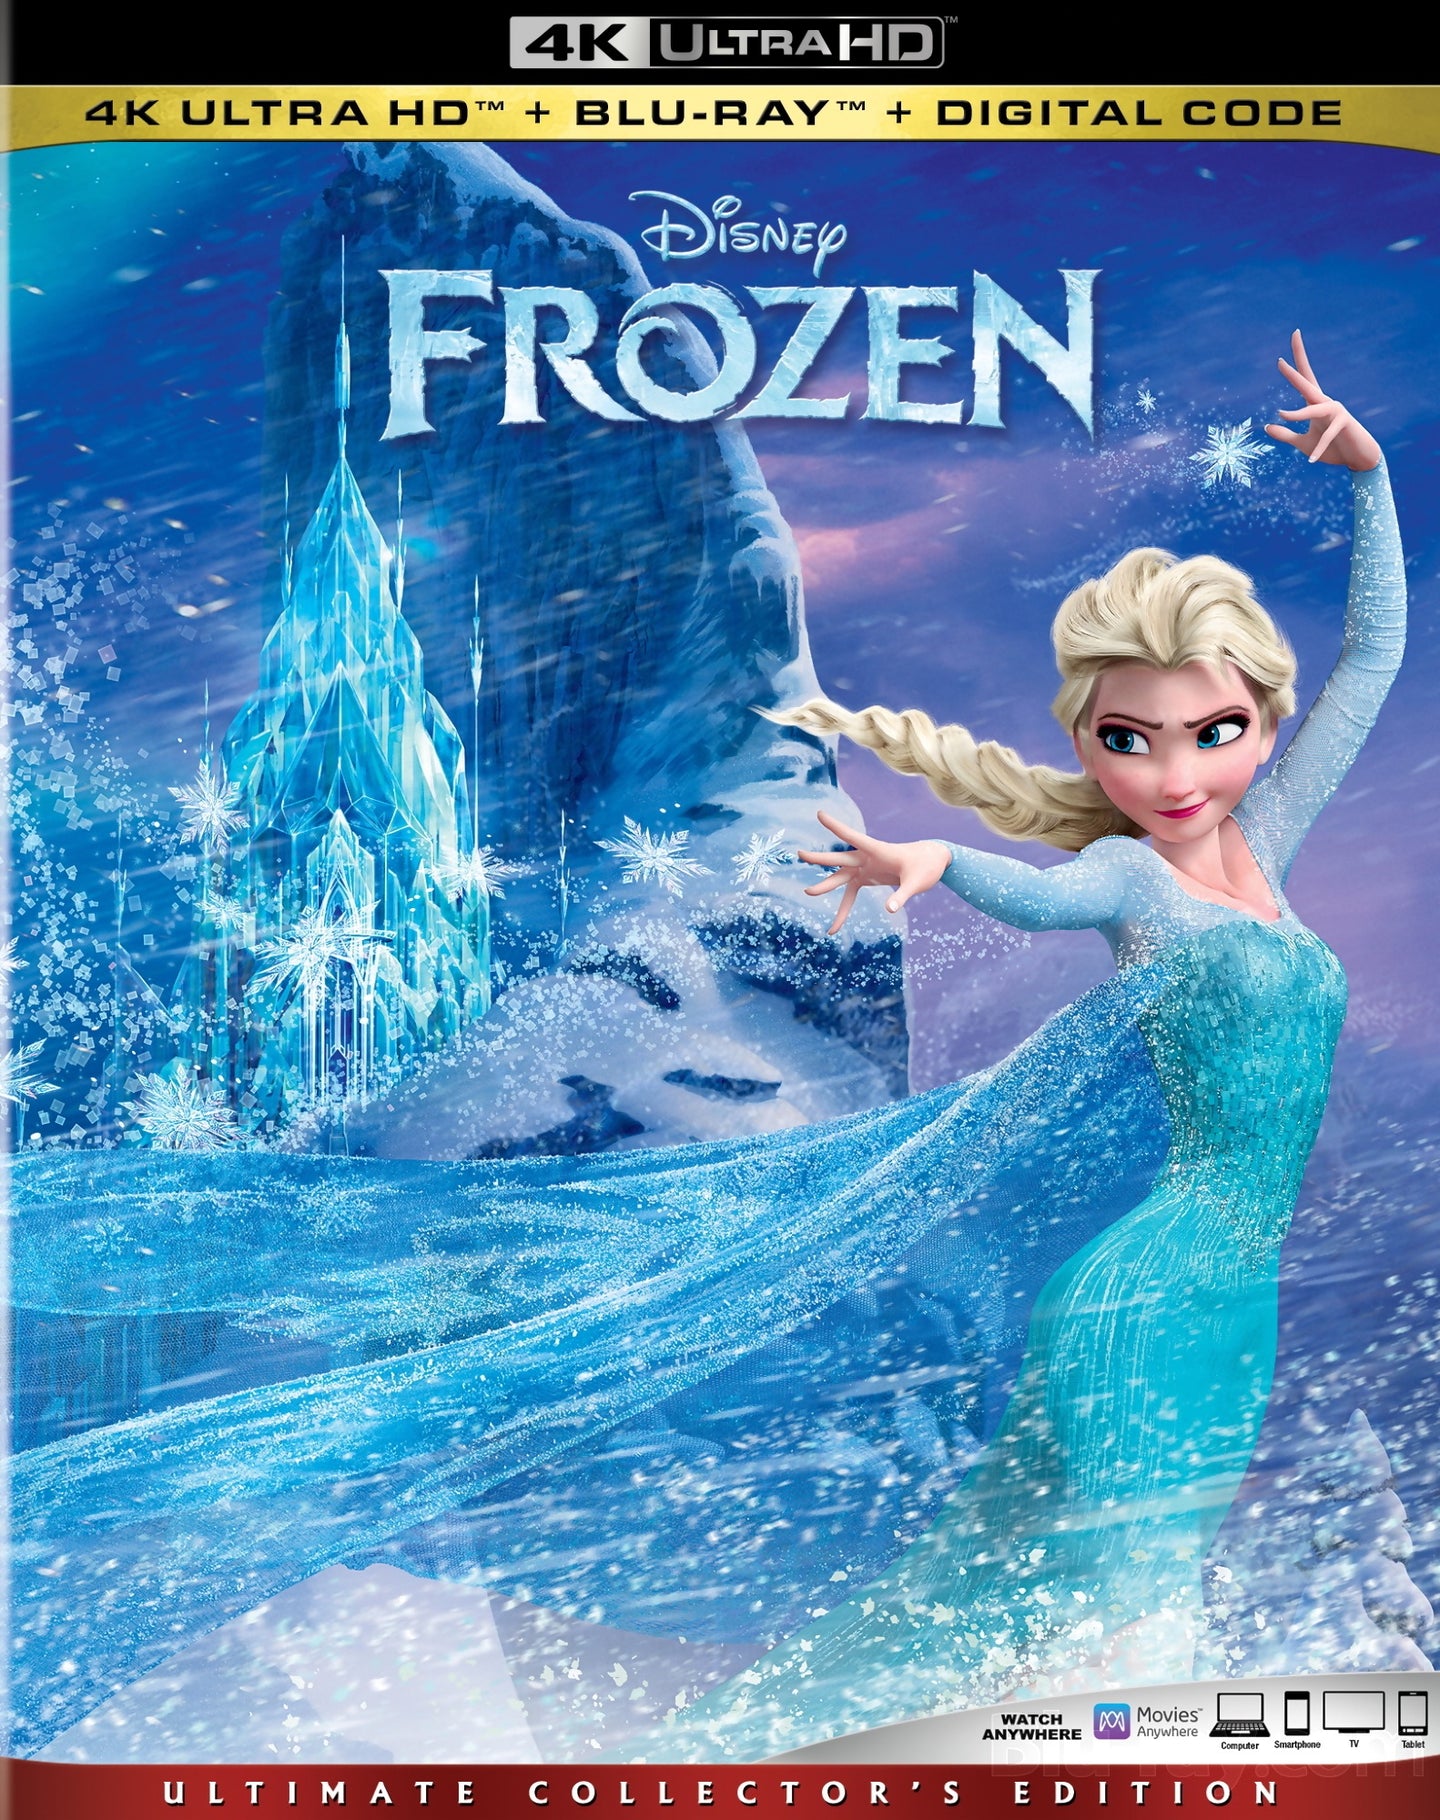 Frozen (2013) Vudu or Movies Anywhere 4K redemption only